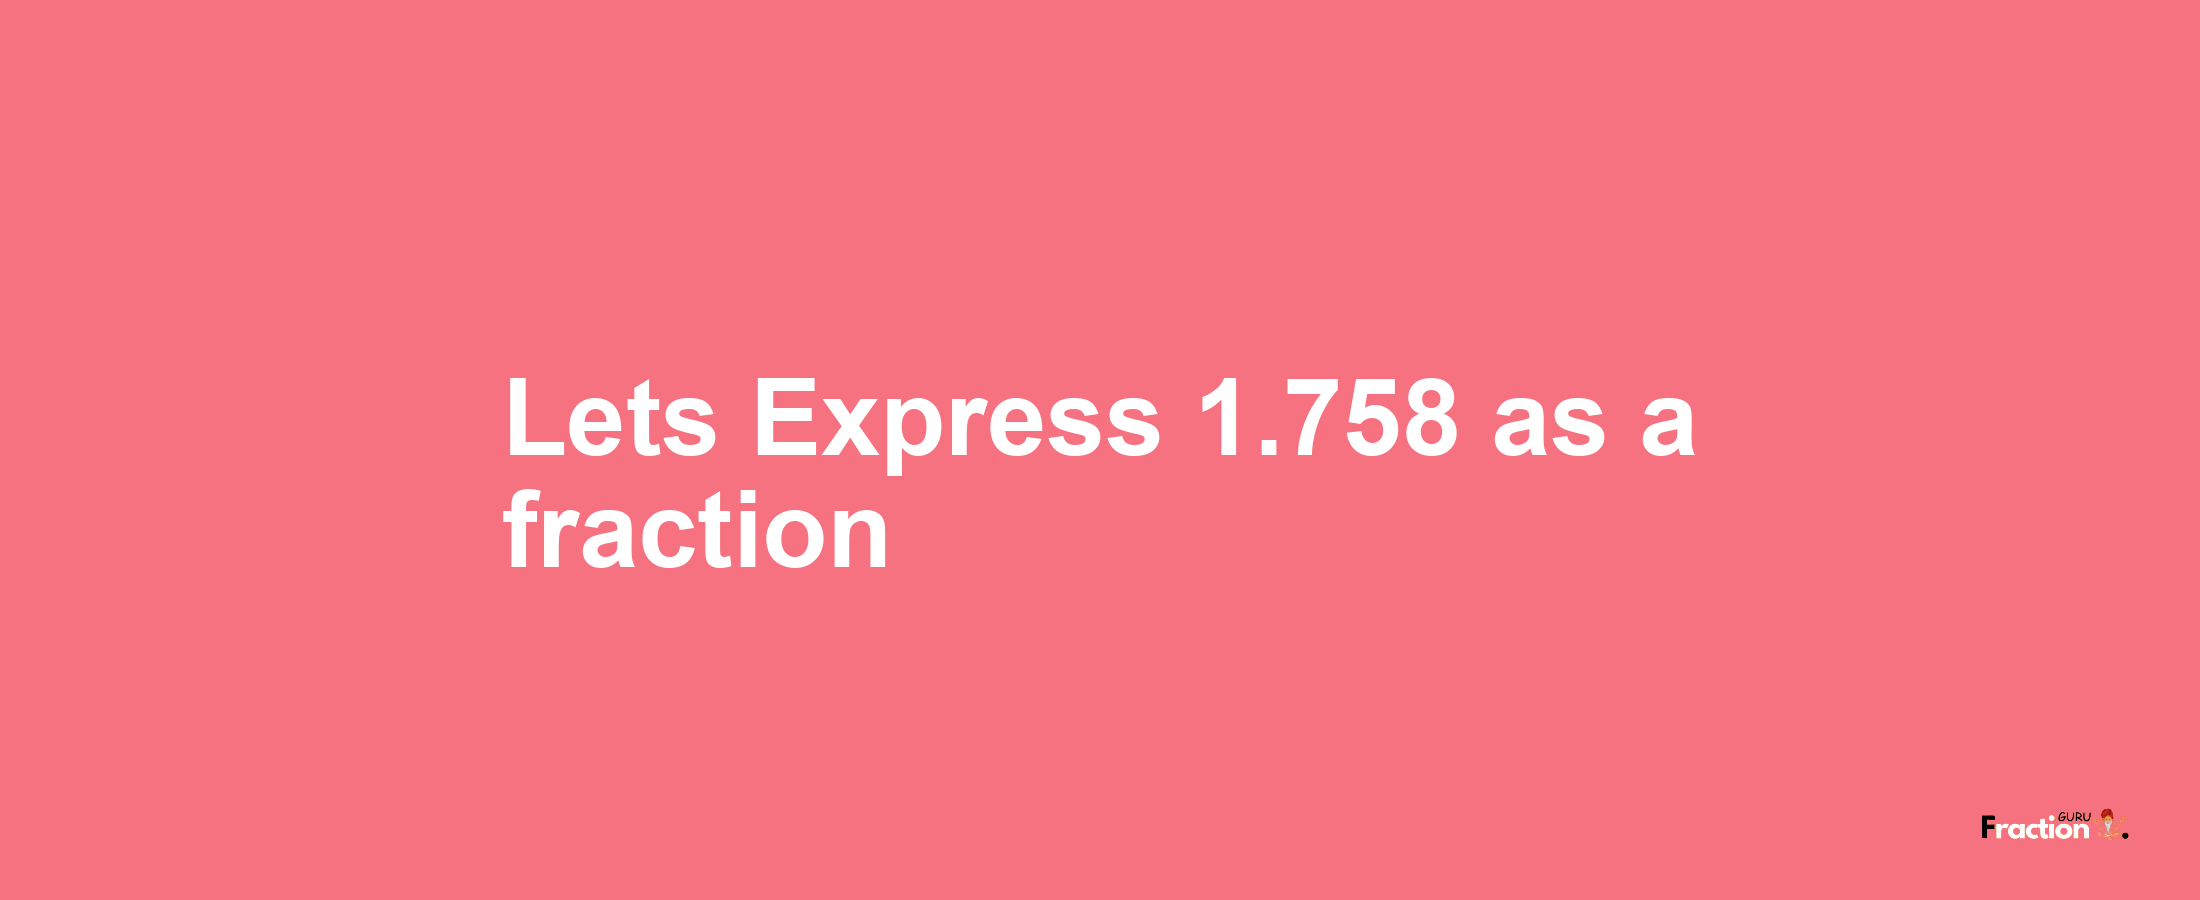 Lets Express 1.758 as afraction